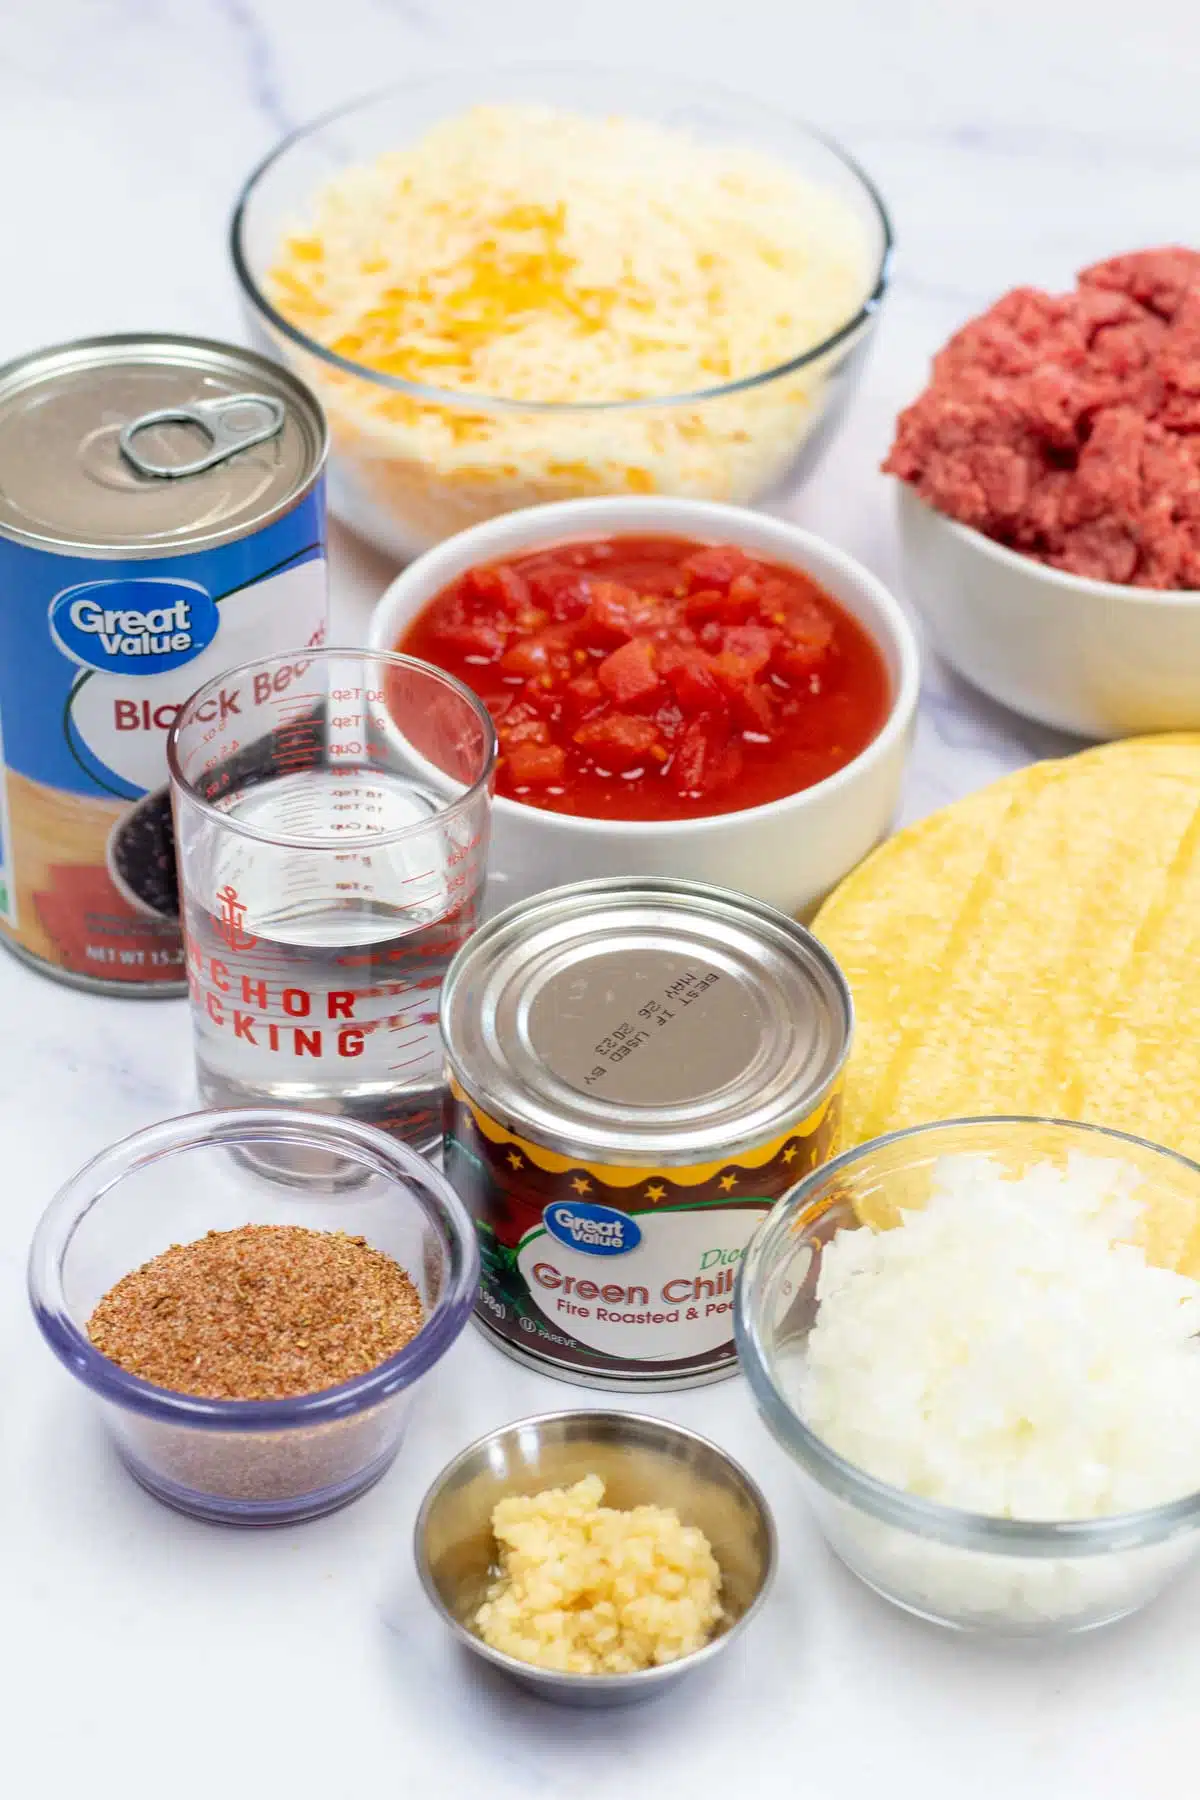 Tall image showing Mexican lasagna casserole ingredients